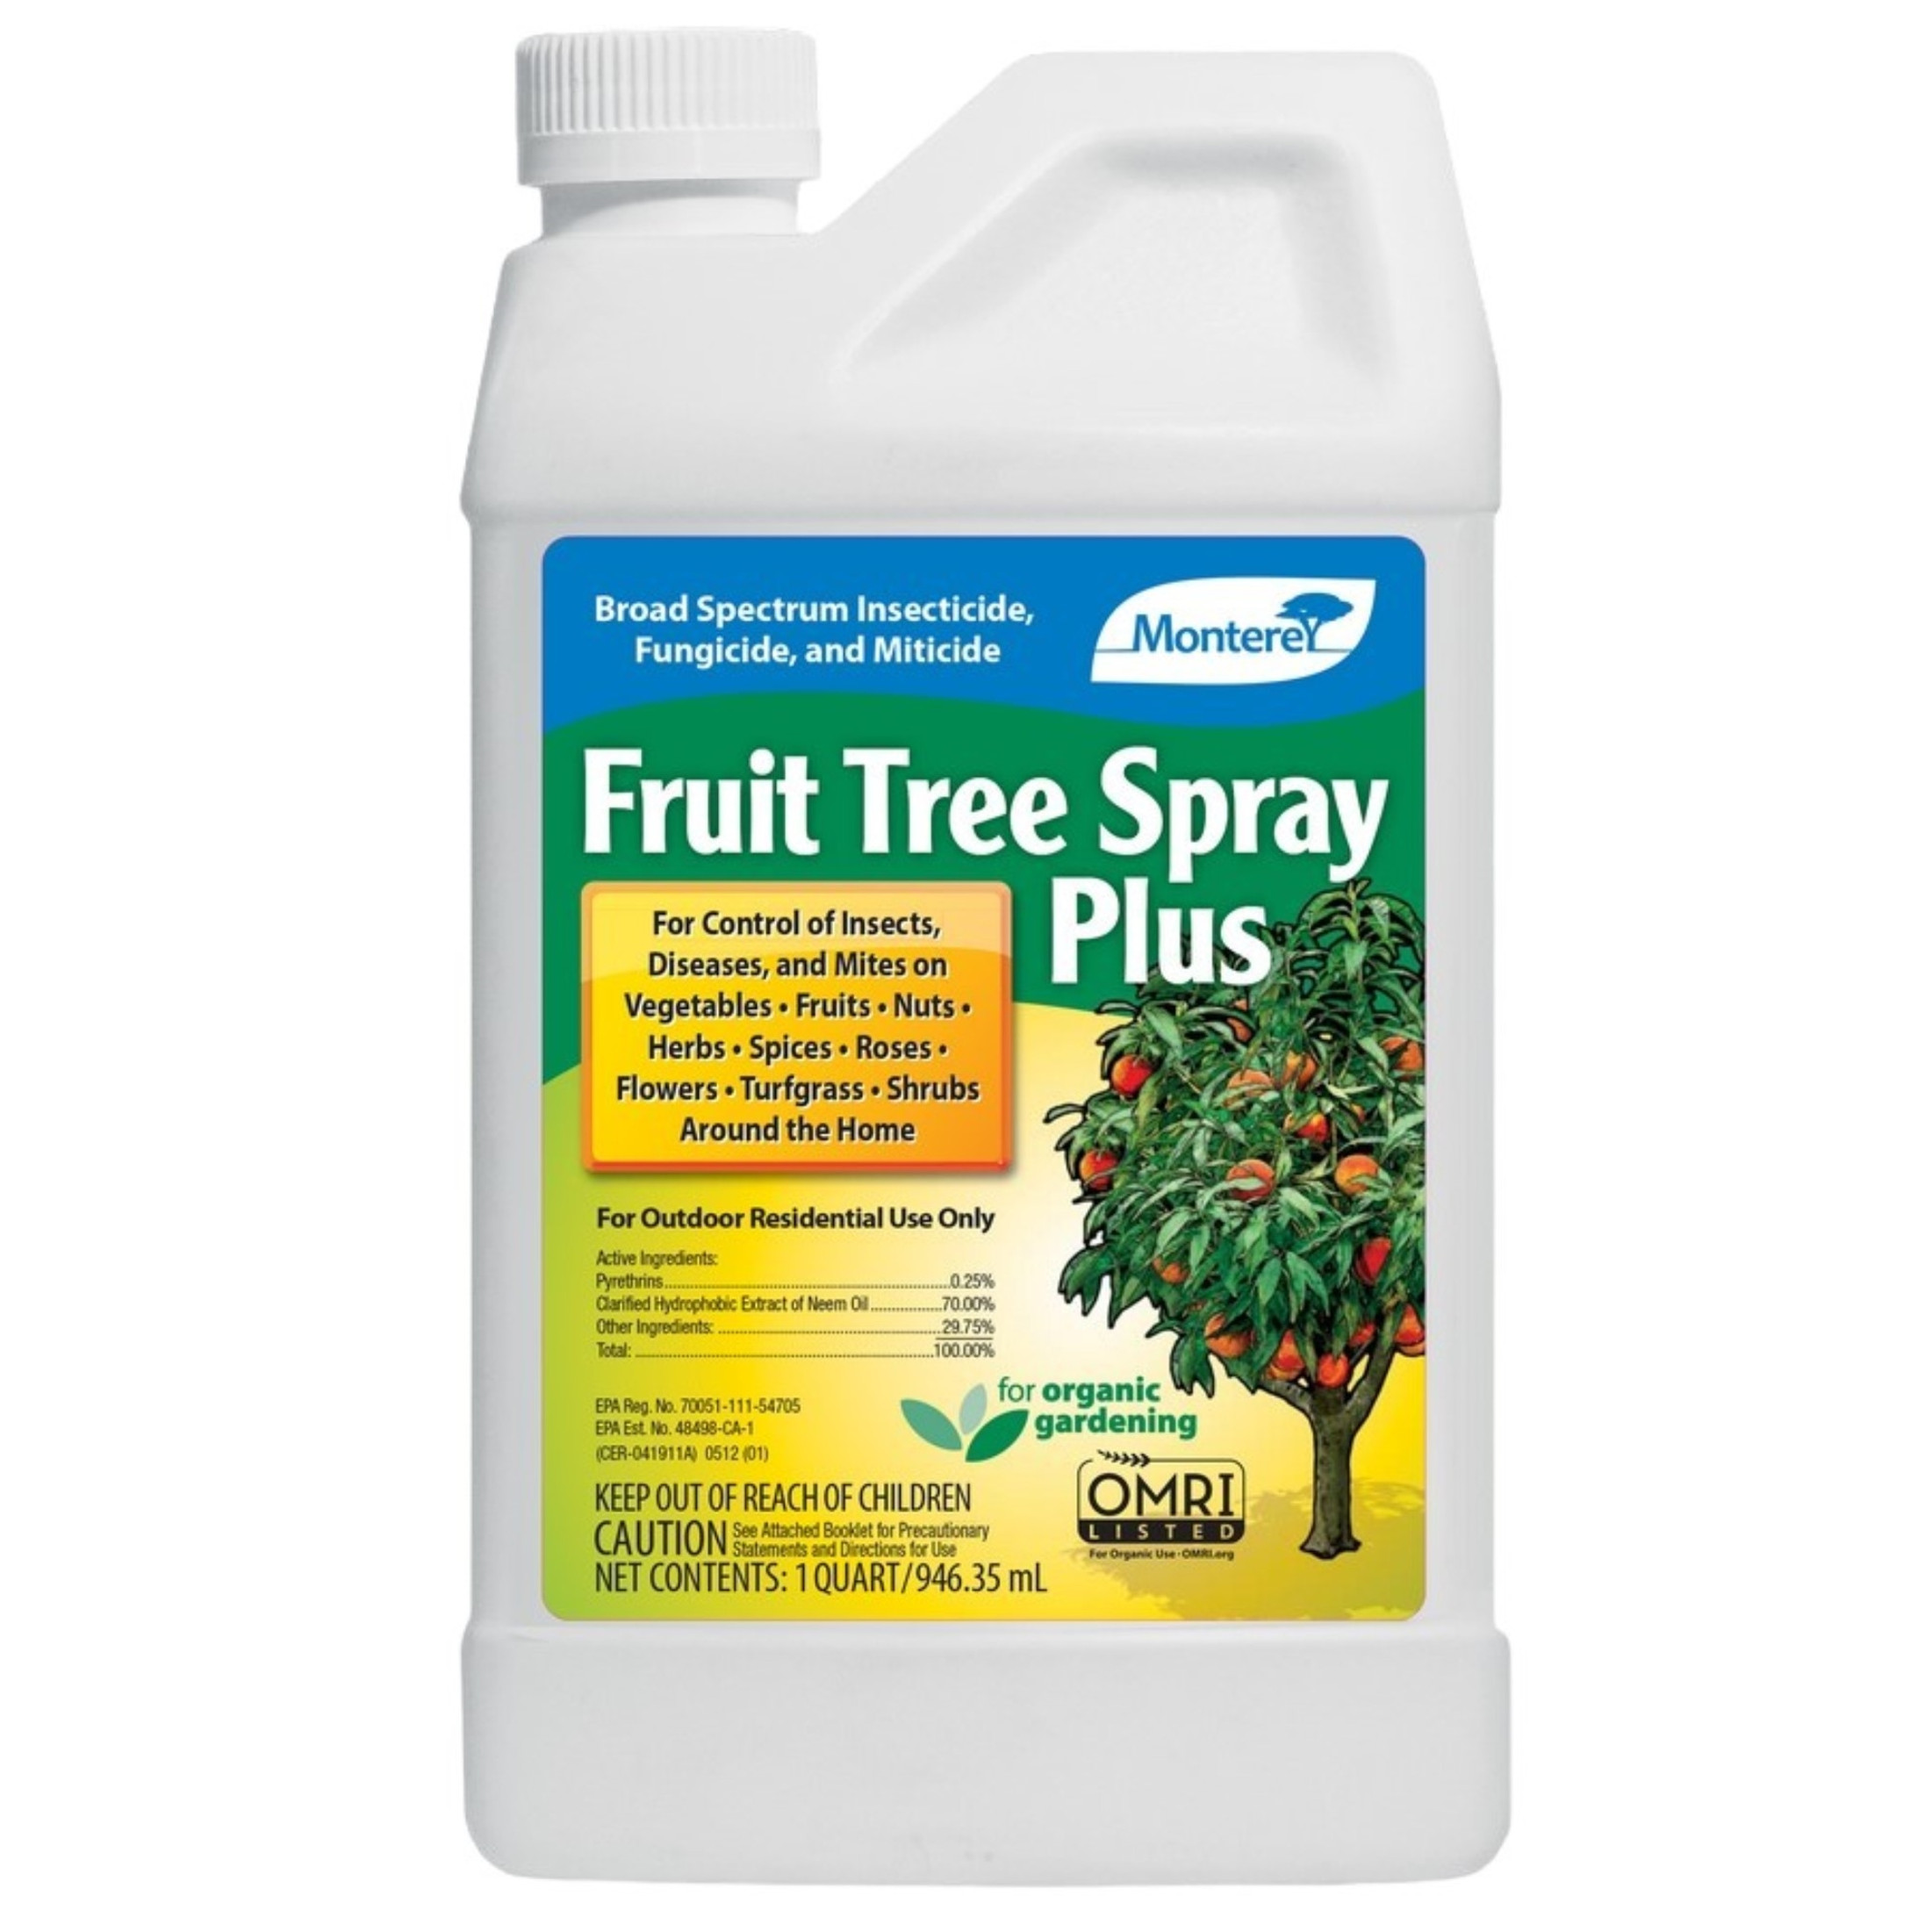 Monterey Fruit Tree Spray Plus for Organic Gardening, Broad-Spectrum Insecticide, Fungicide and Miticide, 32 fl oz